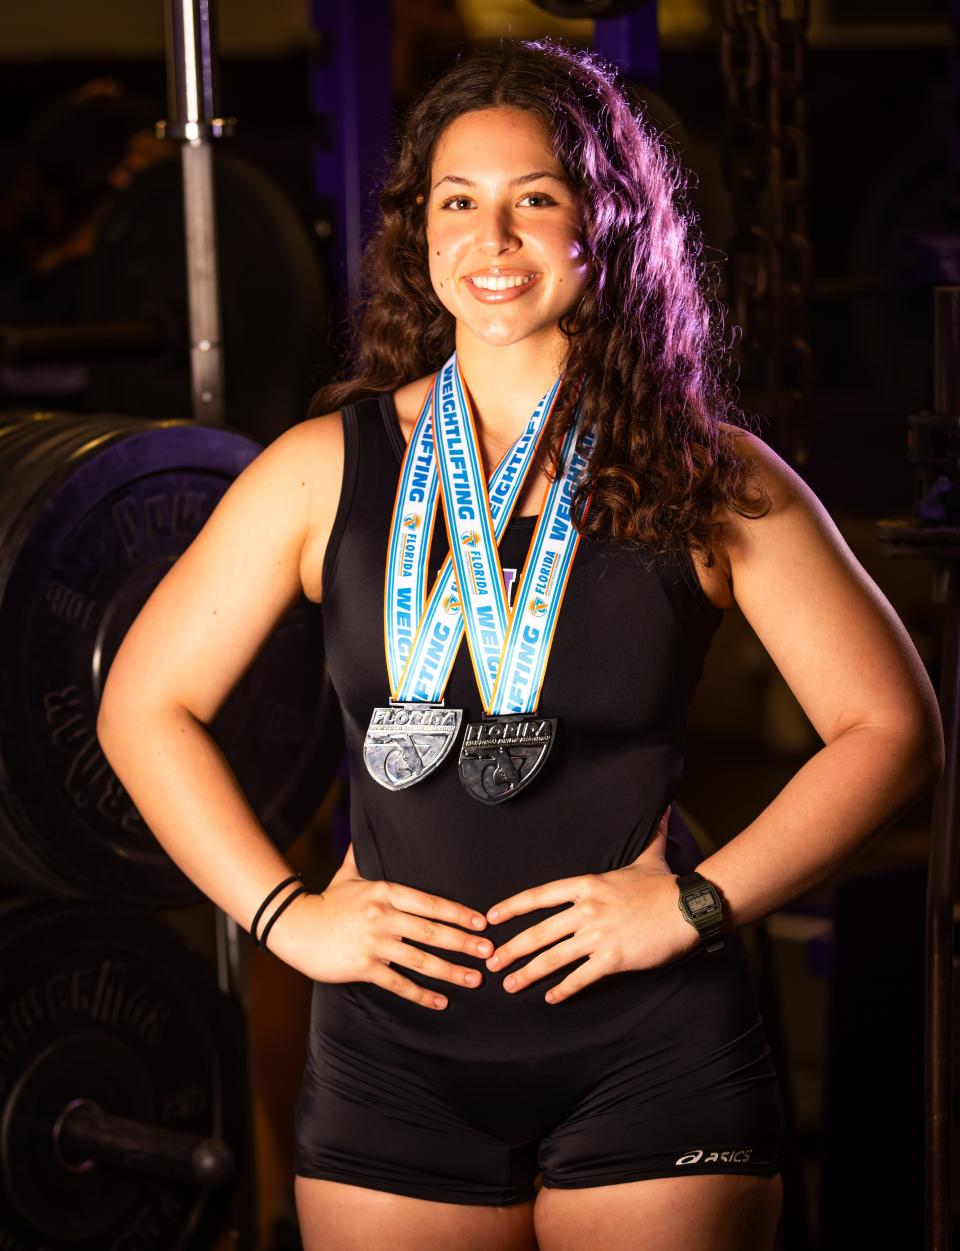 Gainesville High School junior Ori Sela is this year’s Gainesville Sun Girls Weightlifter of the Year. She took second place in State Weightlifting with Traditional, which is bench and clean and jerk and second place in Olympic, which is snatch and clean and jerk. [Doug Engle/Ocala Star Banner]2022